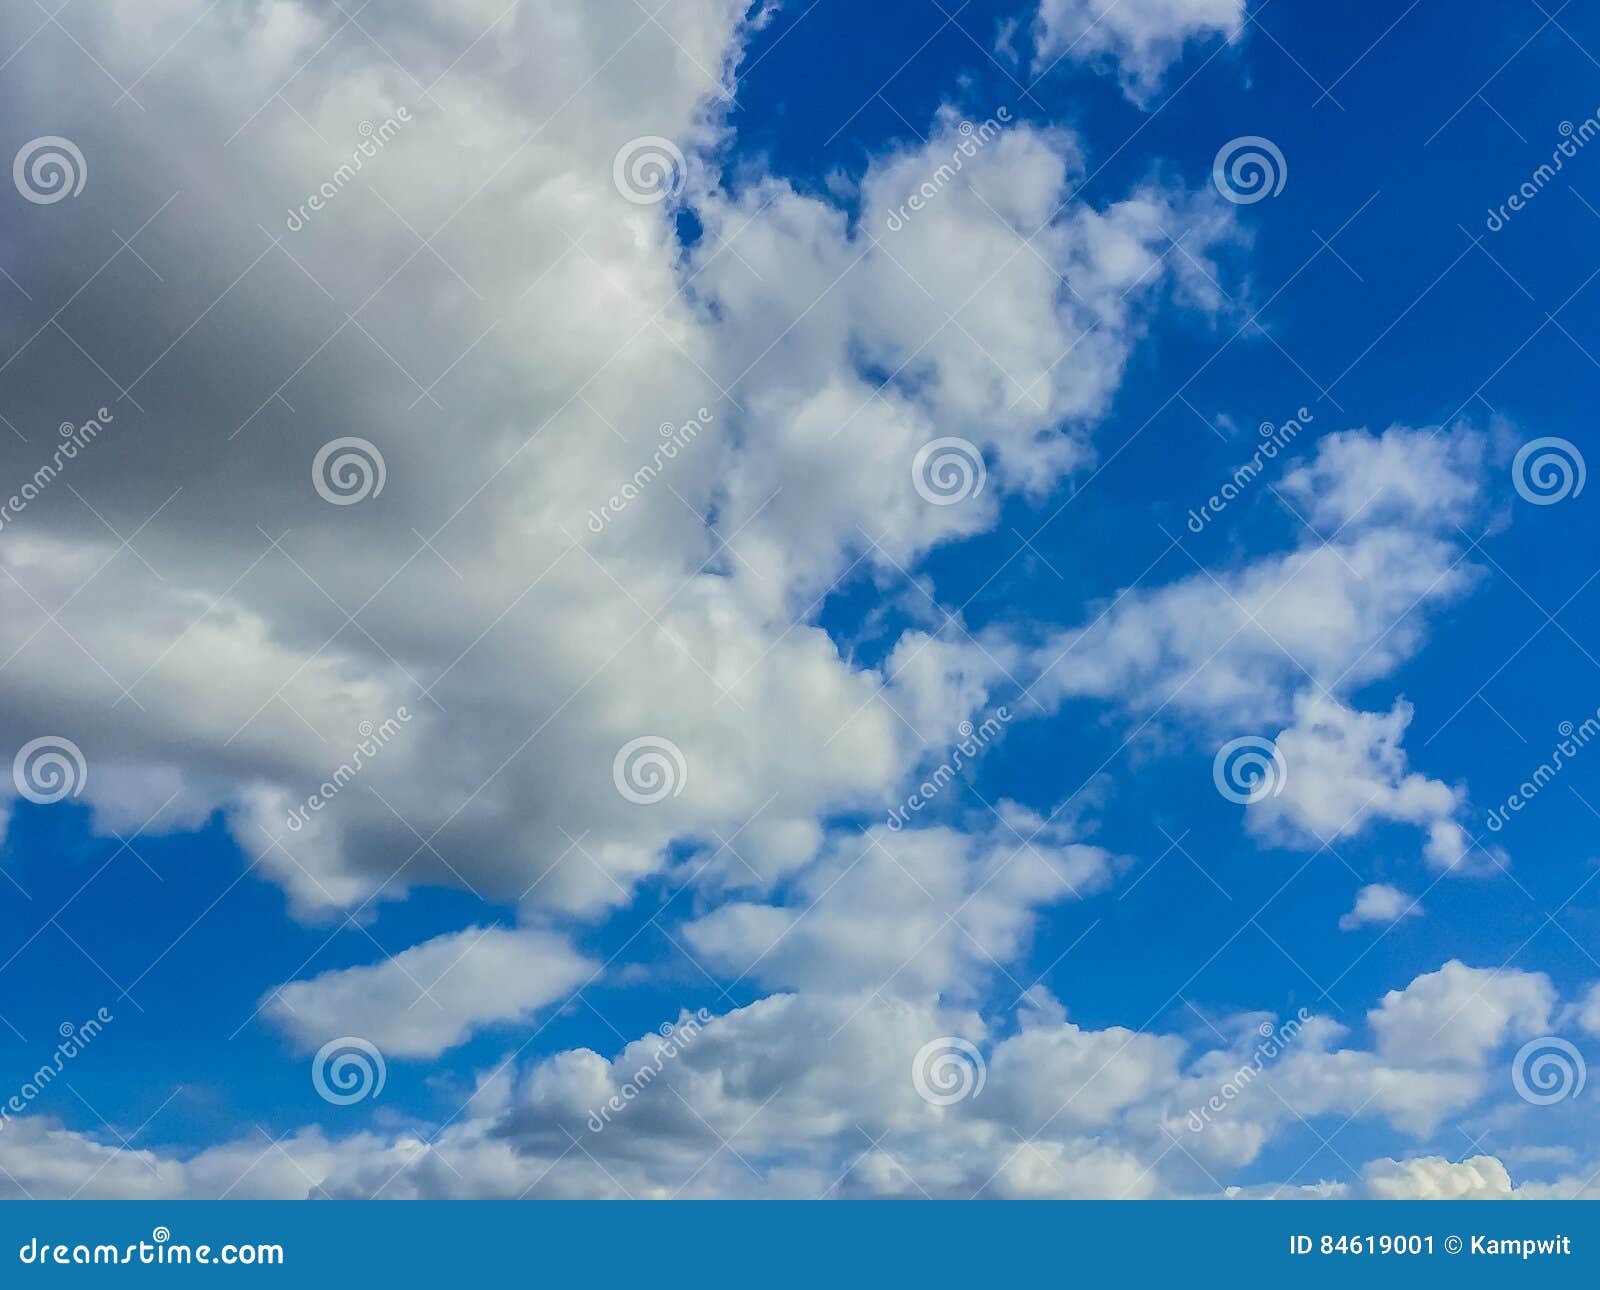 Clear Blue Sky In The Morning With Cloudy As A Background